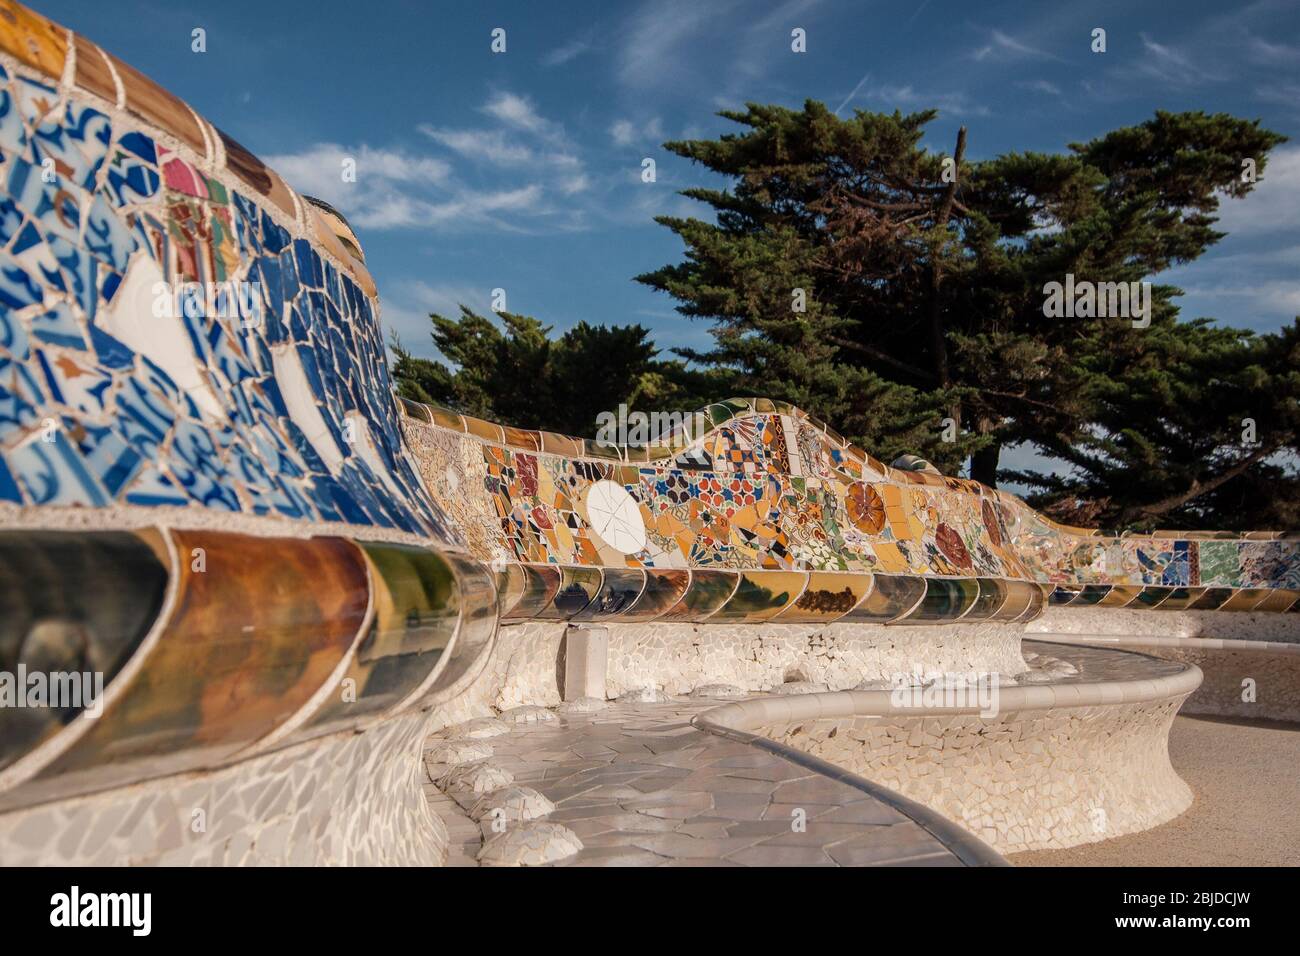 Barcelona, Spain - September 20, 2014: Large undulating seating area in the centre of Guell Park, Barcelona. The ceramic tiles that adorn the seating Stock Photo